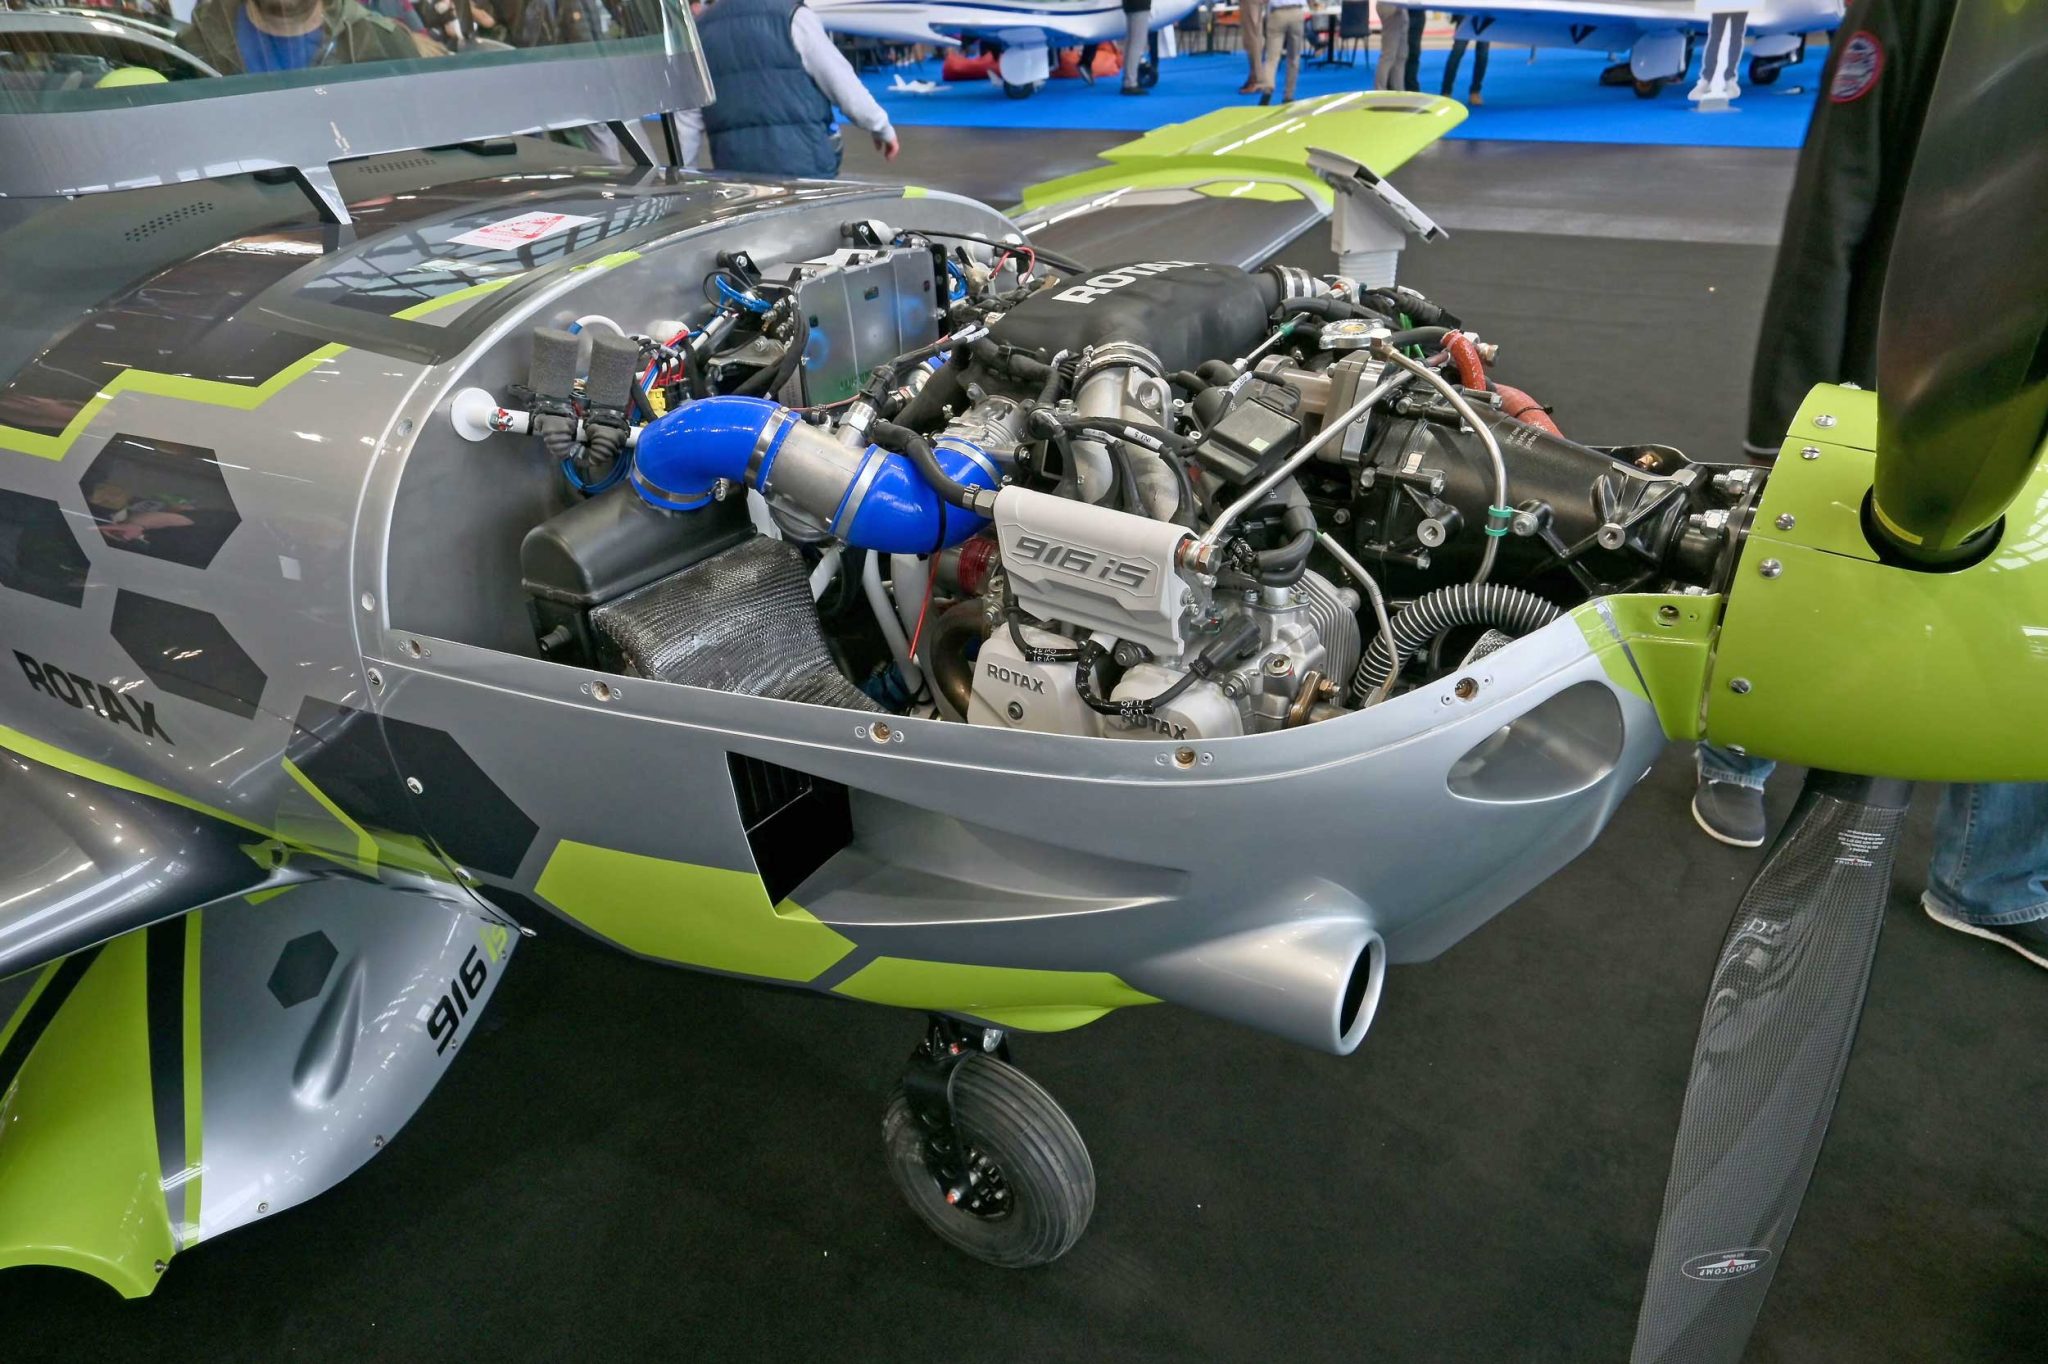 How many new aircraft will there be with the latest Rotax 916iS engine?